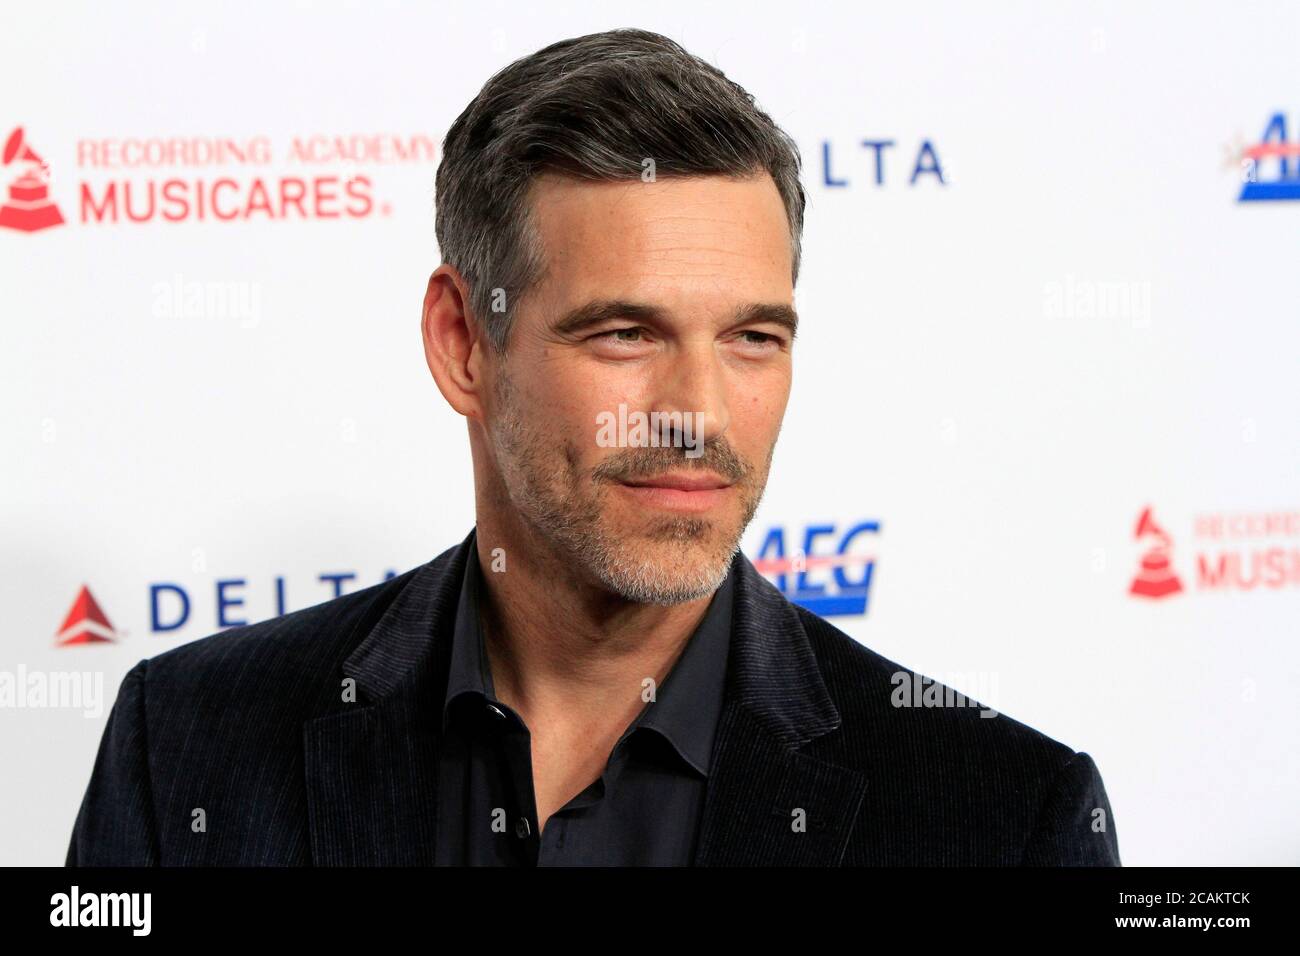 LOS ANGELES - JAN 24:  Eddie Cibrian at the 2020 Muiscares at the Los Angeles Convention Center on January 24, 2020 in Los Angeles, CA Stock Photo